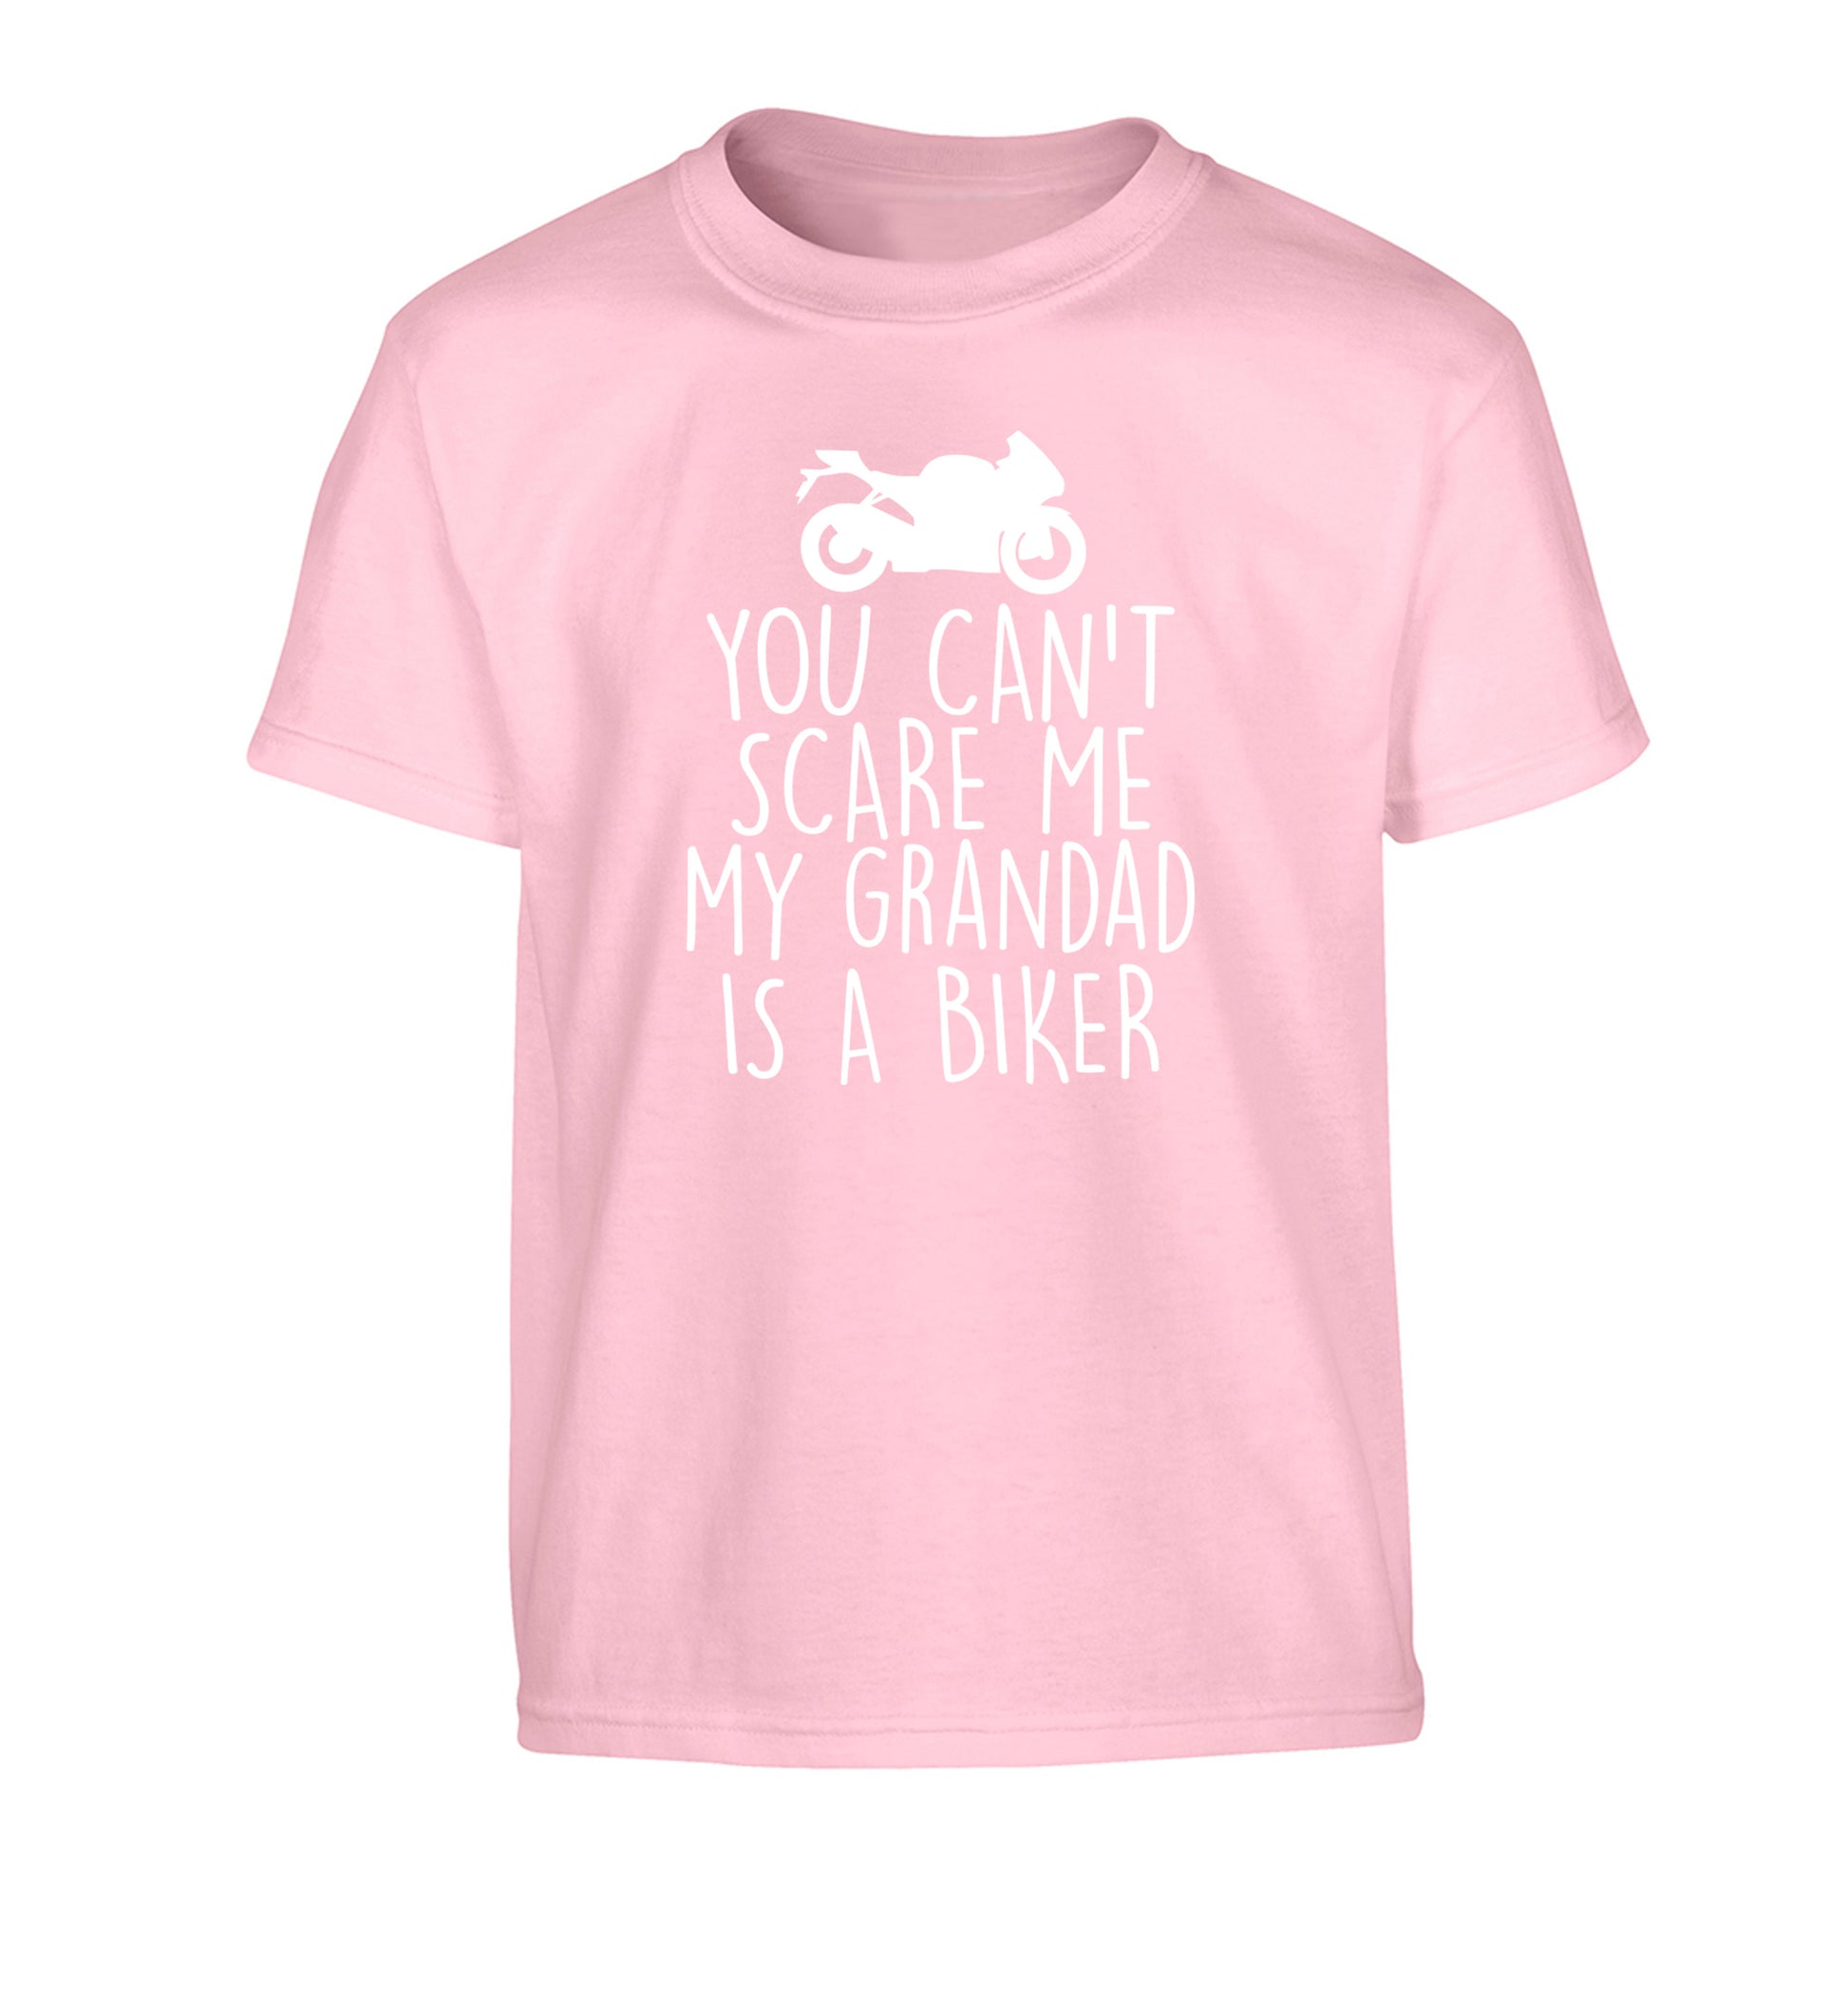 You can't scare me my grandad is a biker Children's light pink Tshirt 12-13 Years